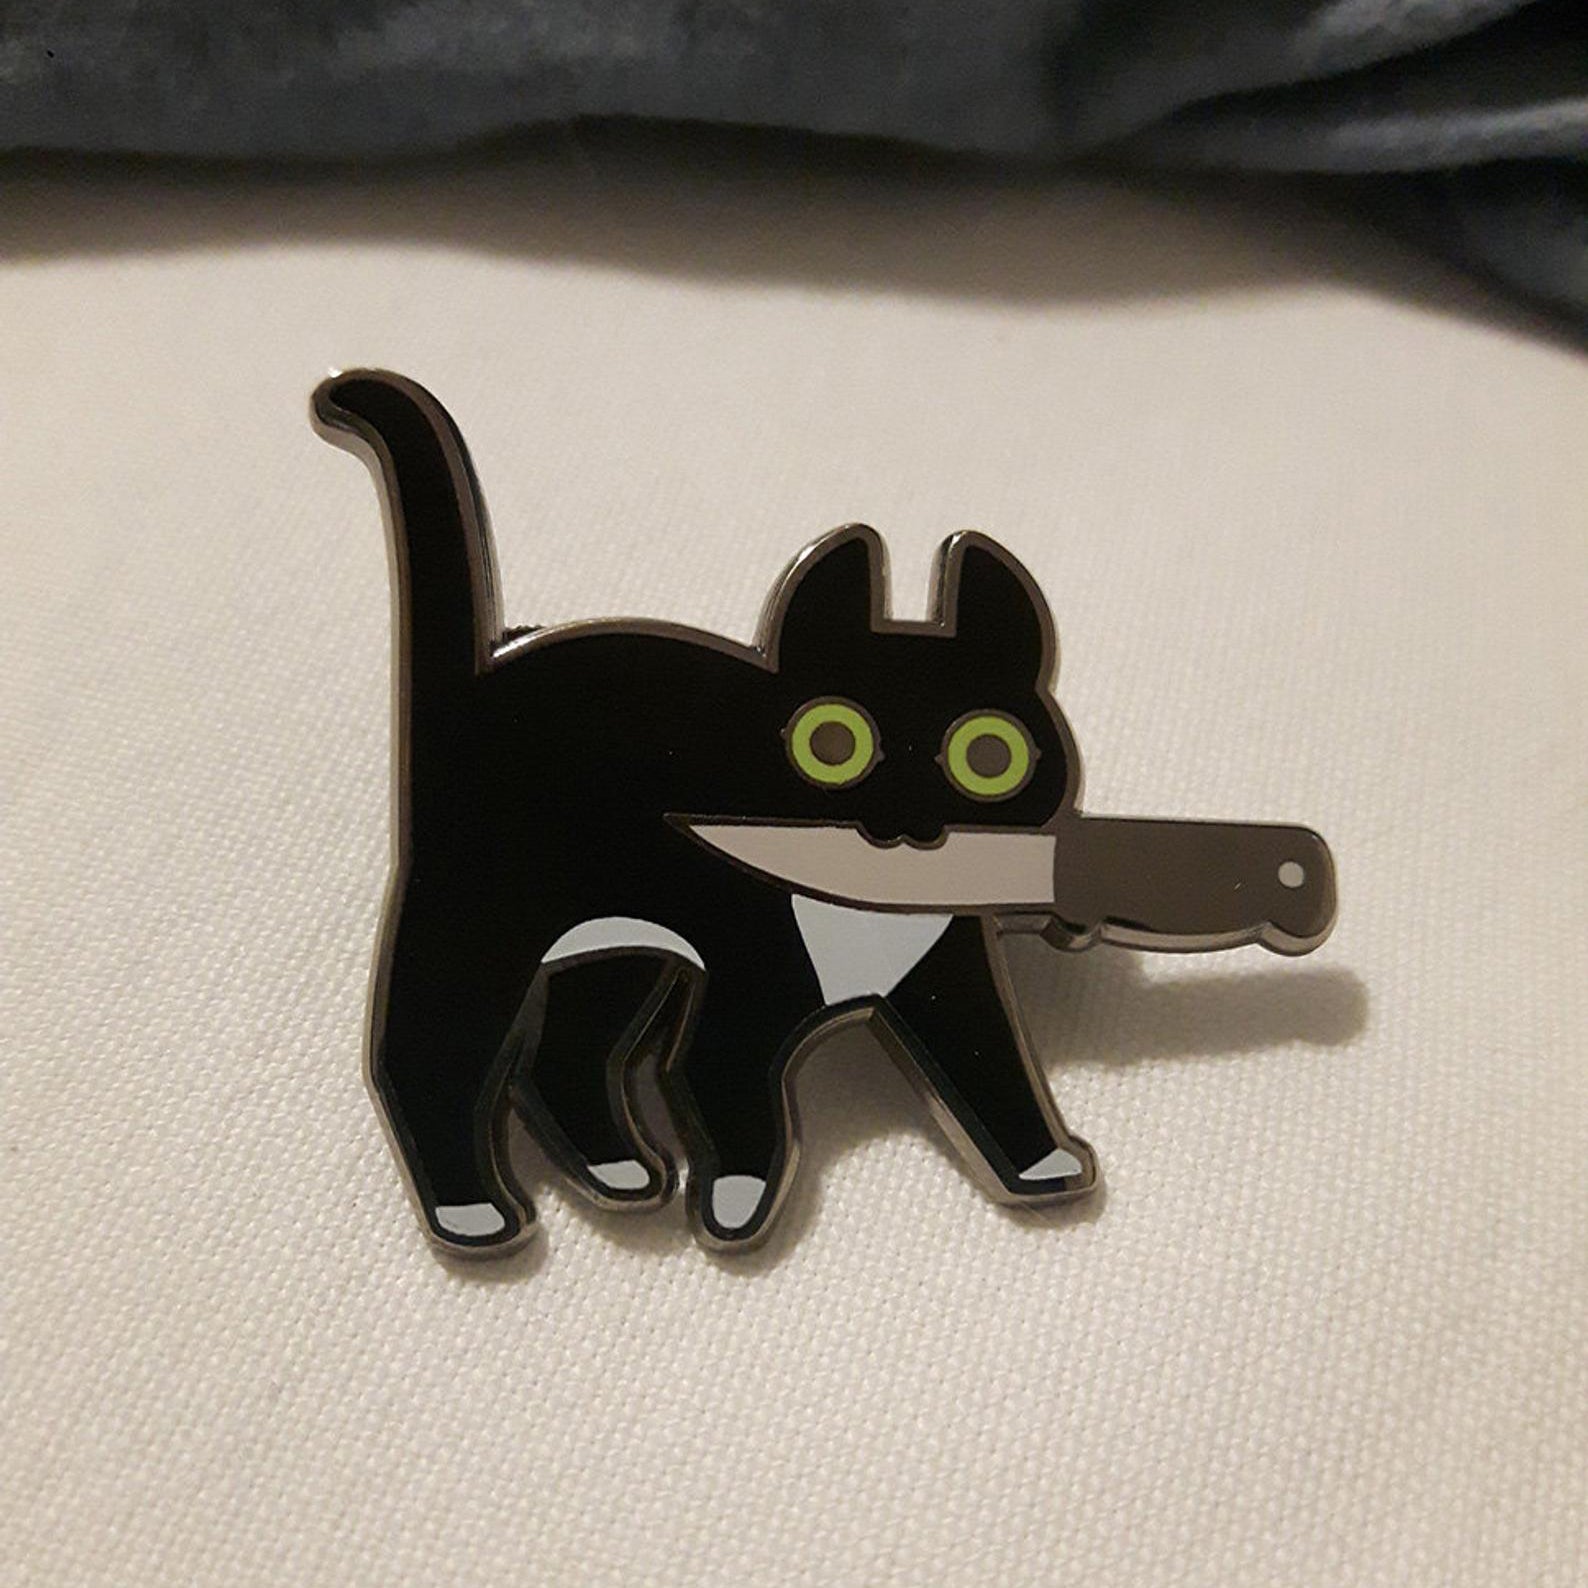 Silver enamel pin of tuxedo cat with green eyes holding knife in mouth with white cloth background.